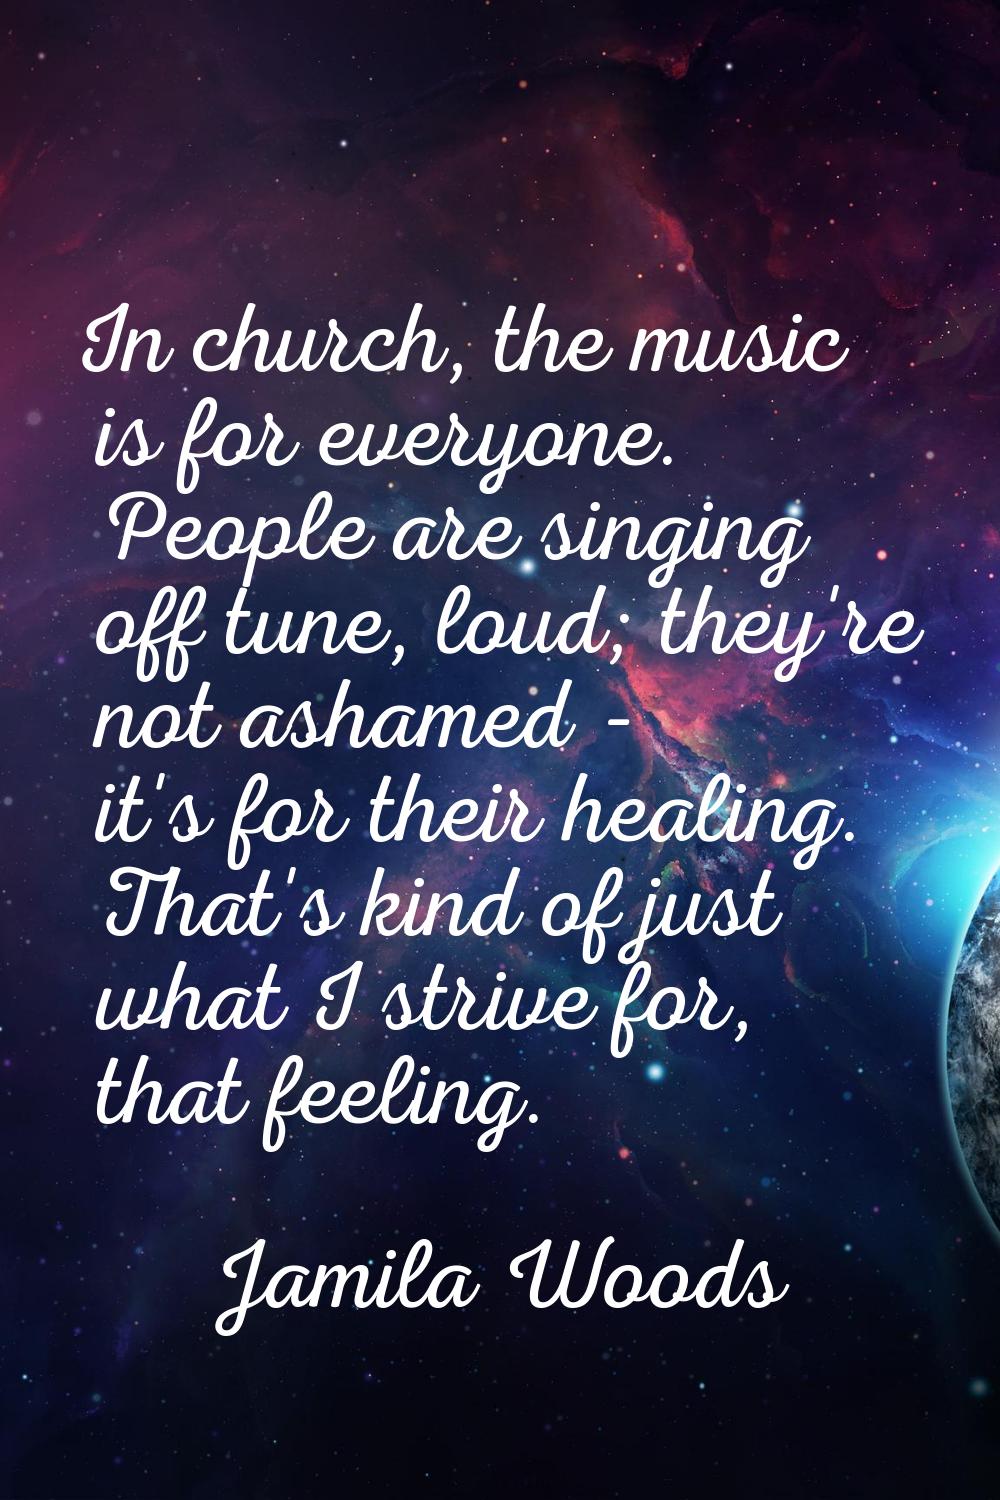 In church, the music is for everyone. People are singing off tune, loud; they're not ashamed - it's